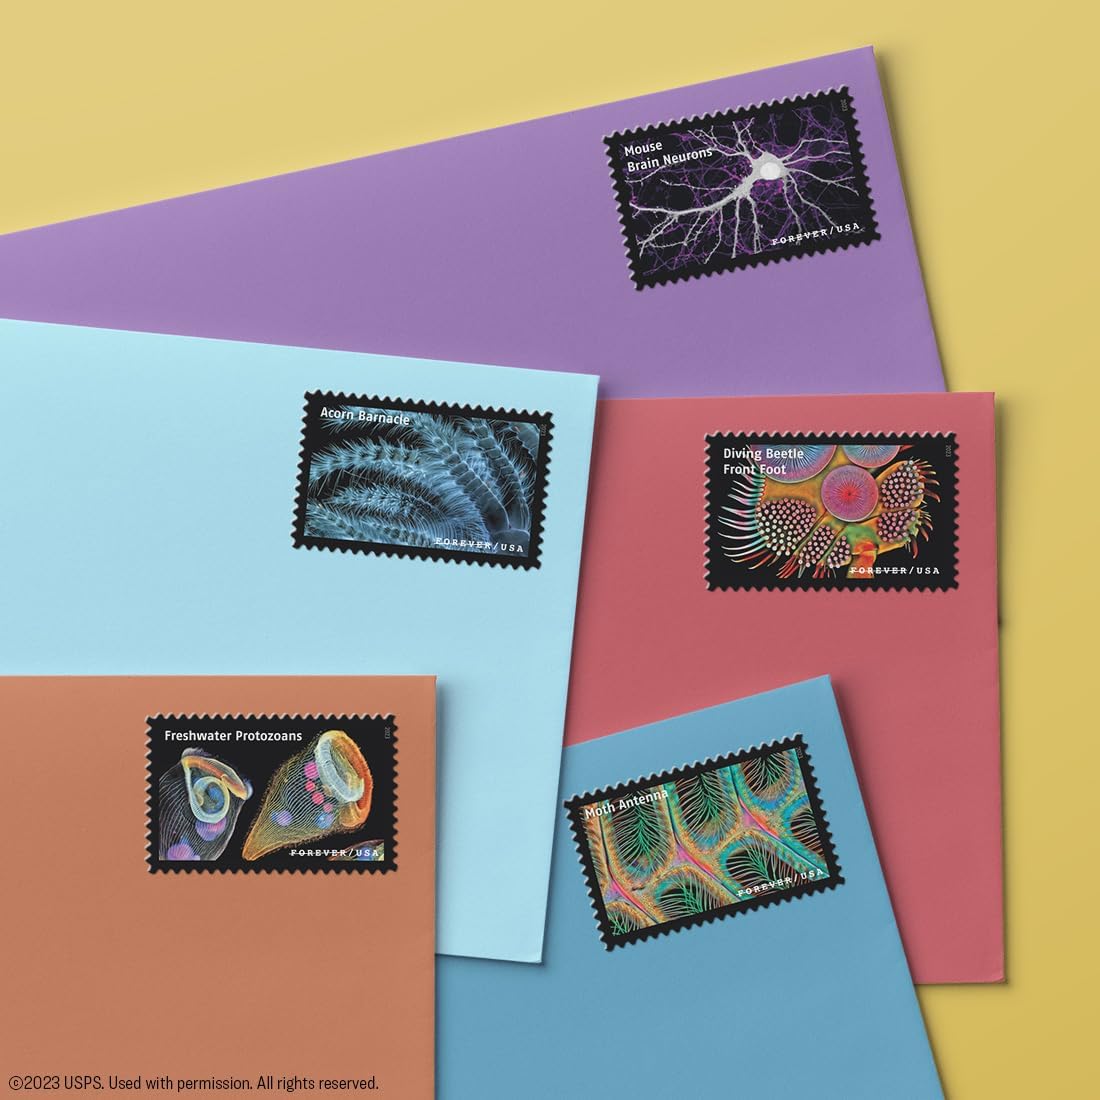 2023 Life Magnified Forever Postage Stamps Explores Life on Earth